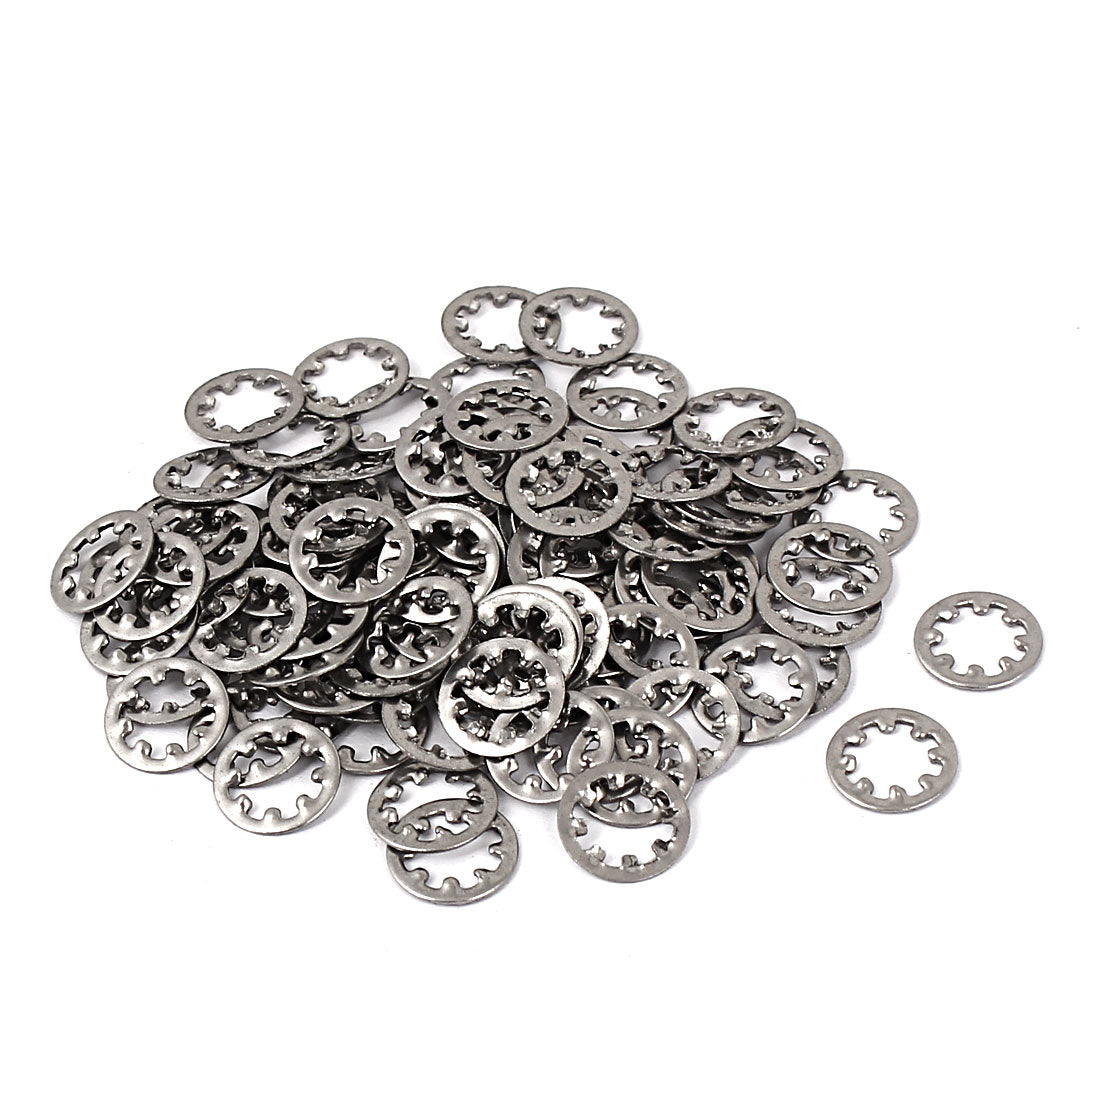 uxcell Uxcell M5 304 Stainless Steel Internal Star Lock Washers 100 Pcs